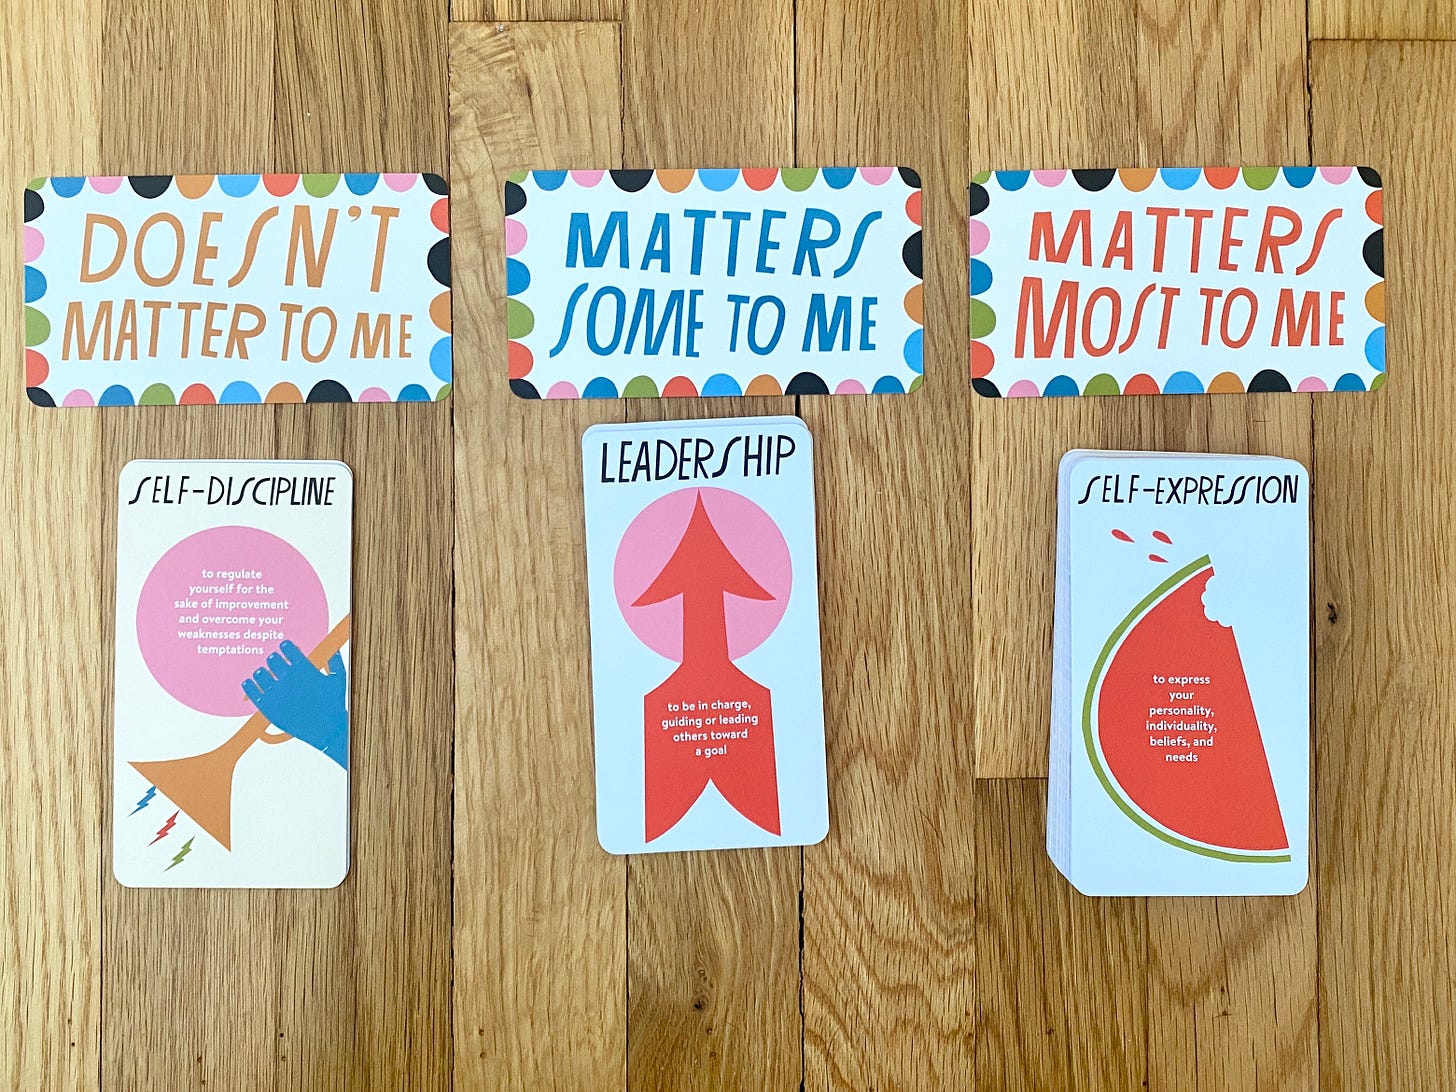 A photograph of colorful cards on a wooden floor. The top row has three cards that say "DOESN'T MATTER TO ME" "MATTERS SOME TO ME" and "MATTERS MOST TO ME." Below the first card is one that says Self-Discipline, below the second card is one that says Leadership, below the third card is one that says Self-Expression.